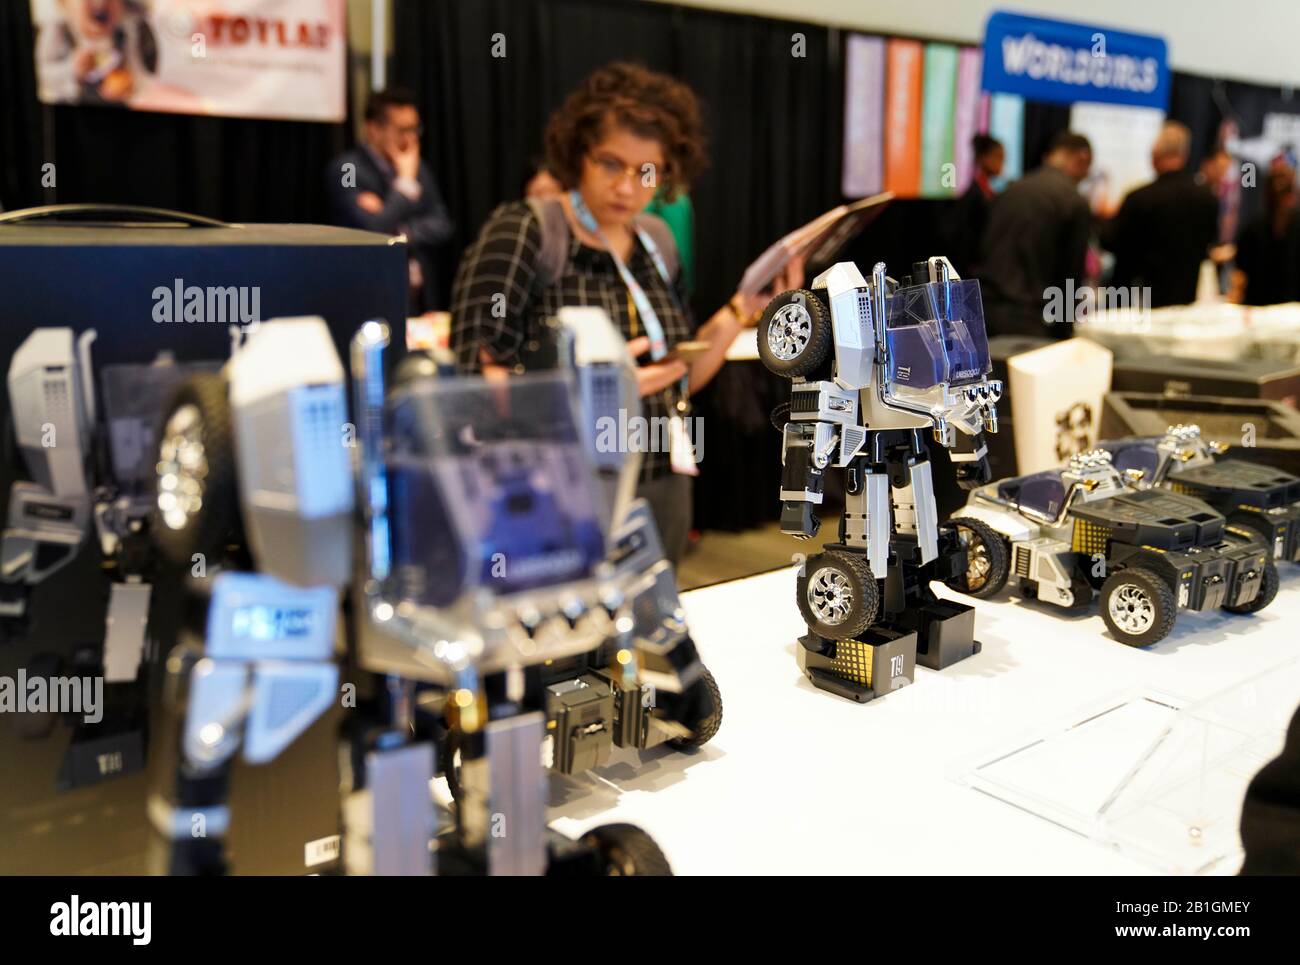 New York, USA. 25th Feb, 2020. T9 miniature robots are on display at the 2020 Toy Fair New York held in New York, the United States, Feb. 25, 2020. Robosen Robotics (Shenzhen) Co., a Chinese tech startup, made its debut at the annual Toy Fair in New York City, aiming to bring innovative gadgets to overseas consumers. Credit: Wang Ying/Xinhua/Alamy Live News Stock Photo